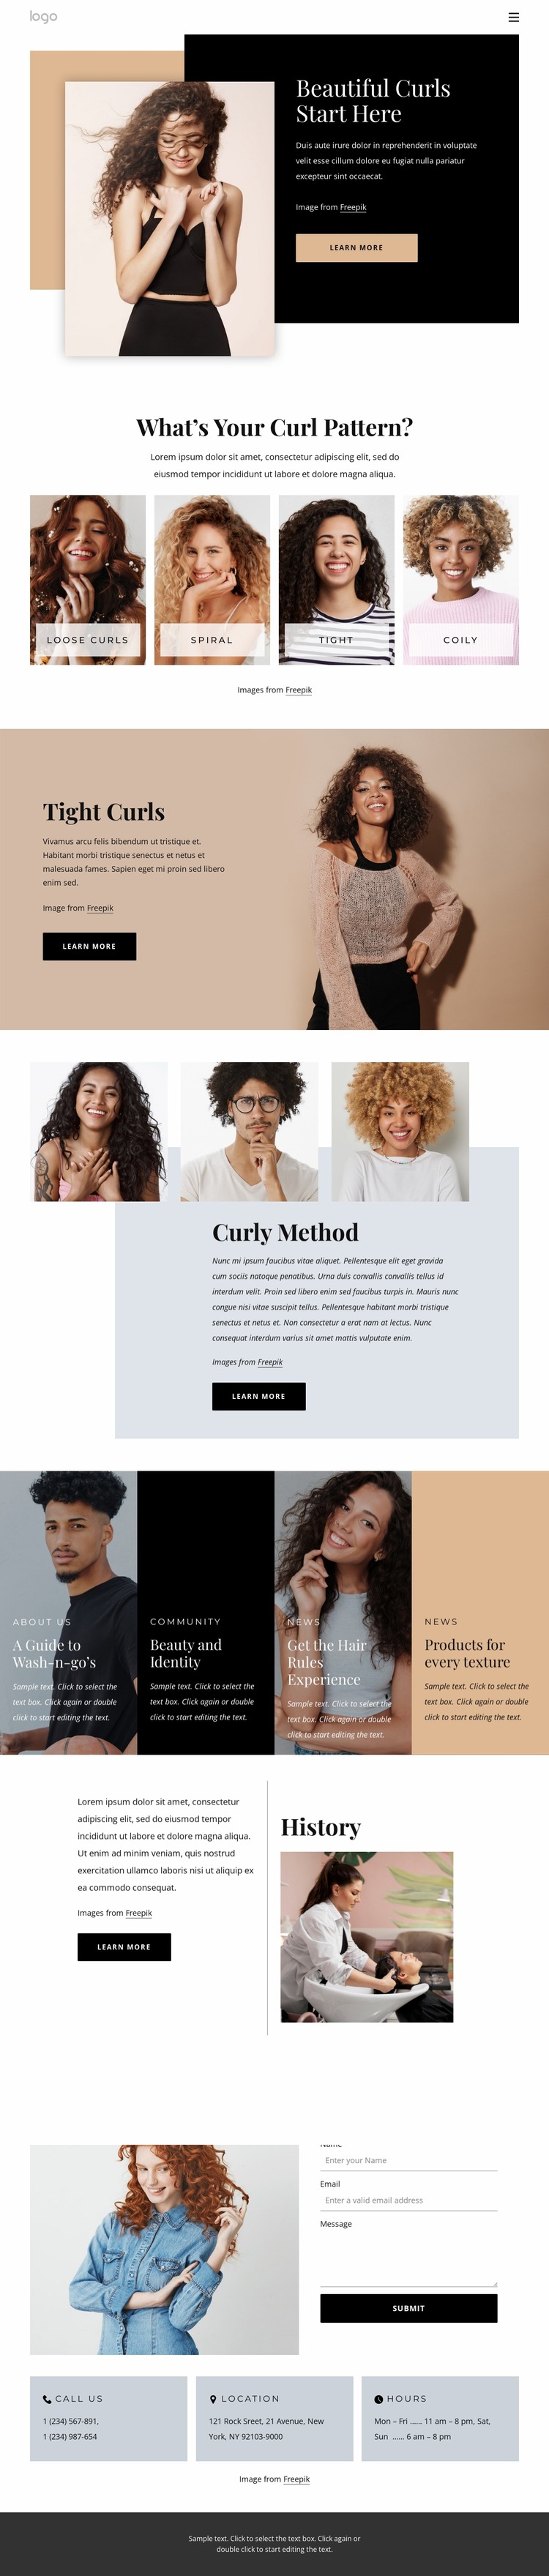 Bring out the best in your curls Html Website Builder